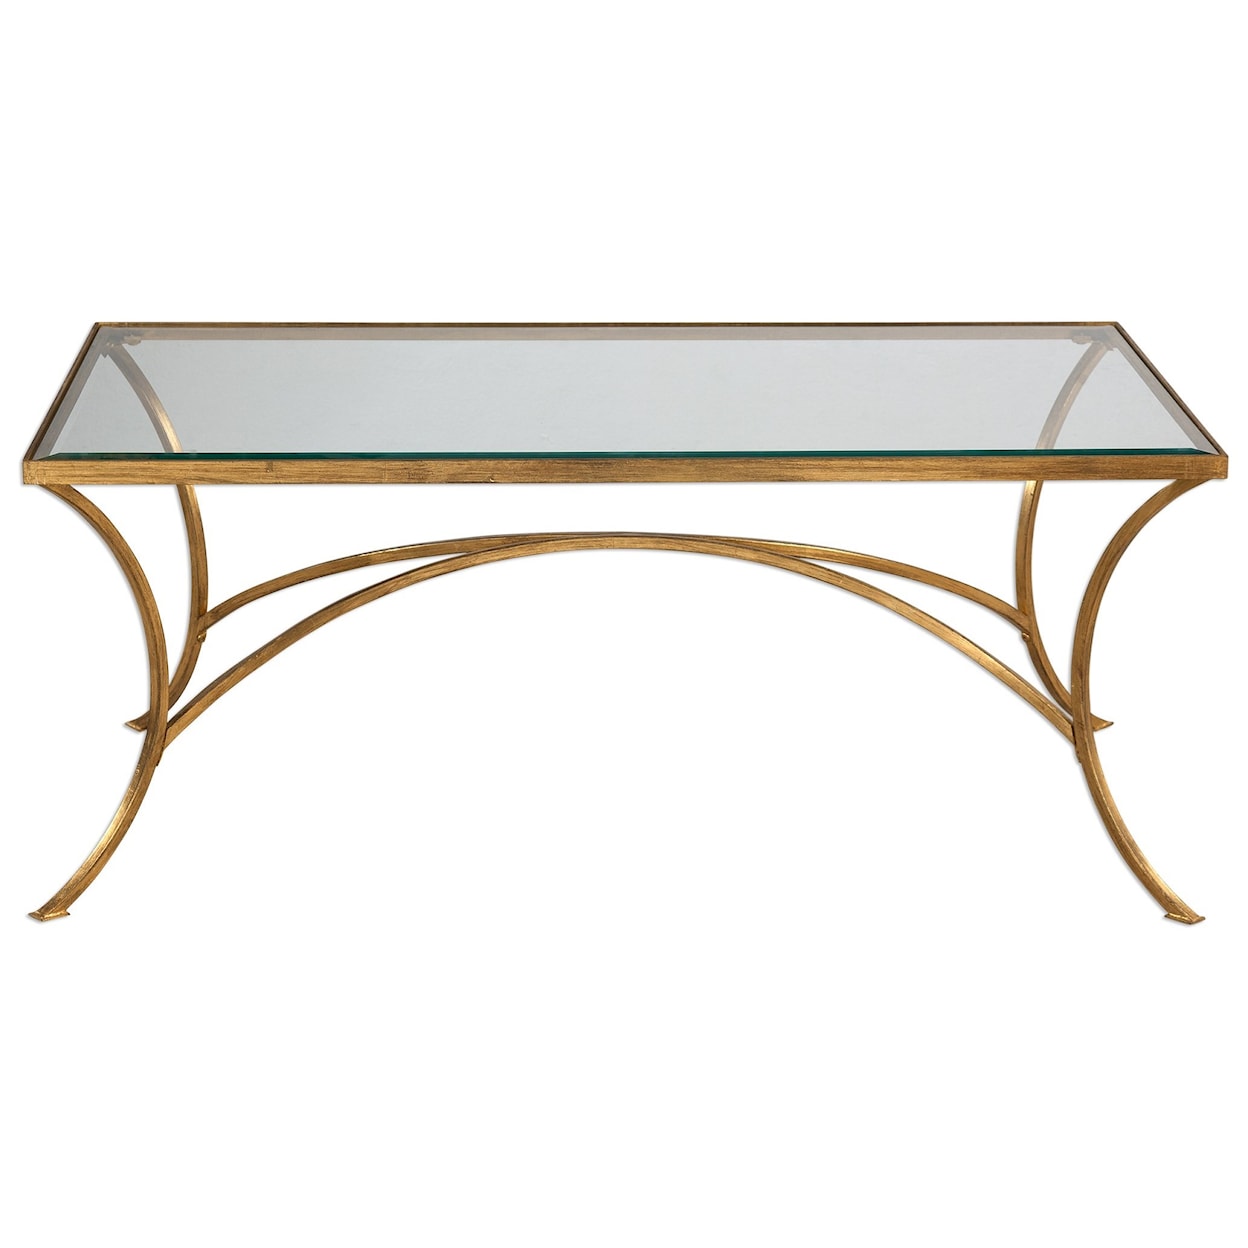 Uttermost Accent Furniture - Occasional Tables Alayna Gold Coffee Table